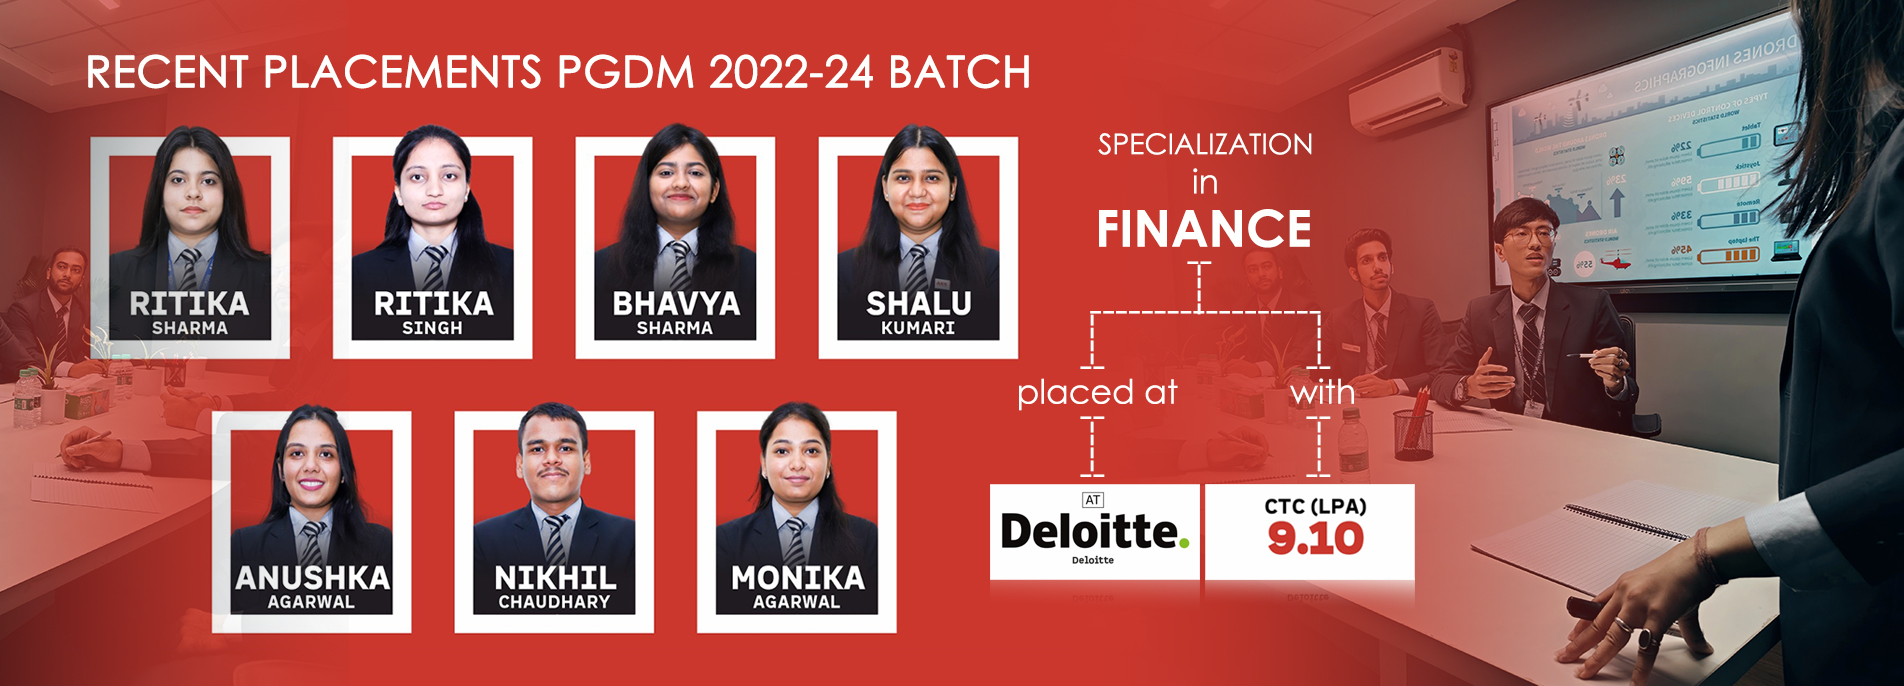 ABS Latest Placements 2022 batch